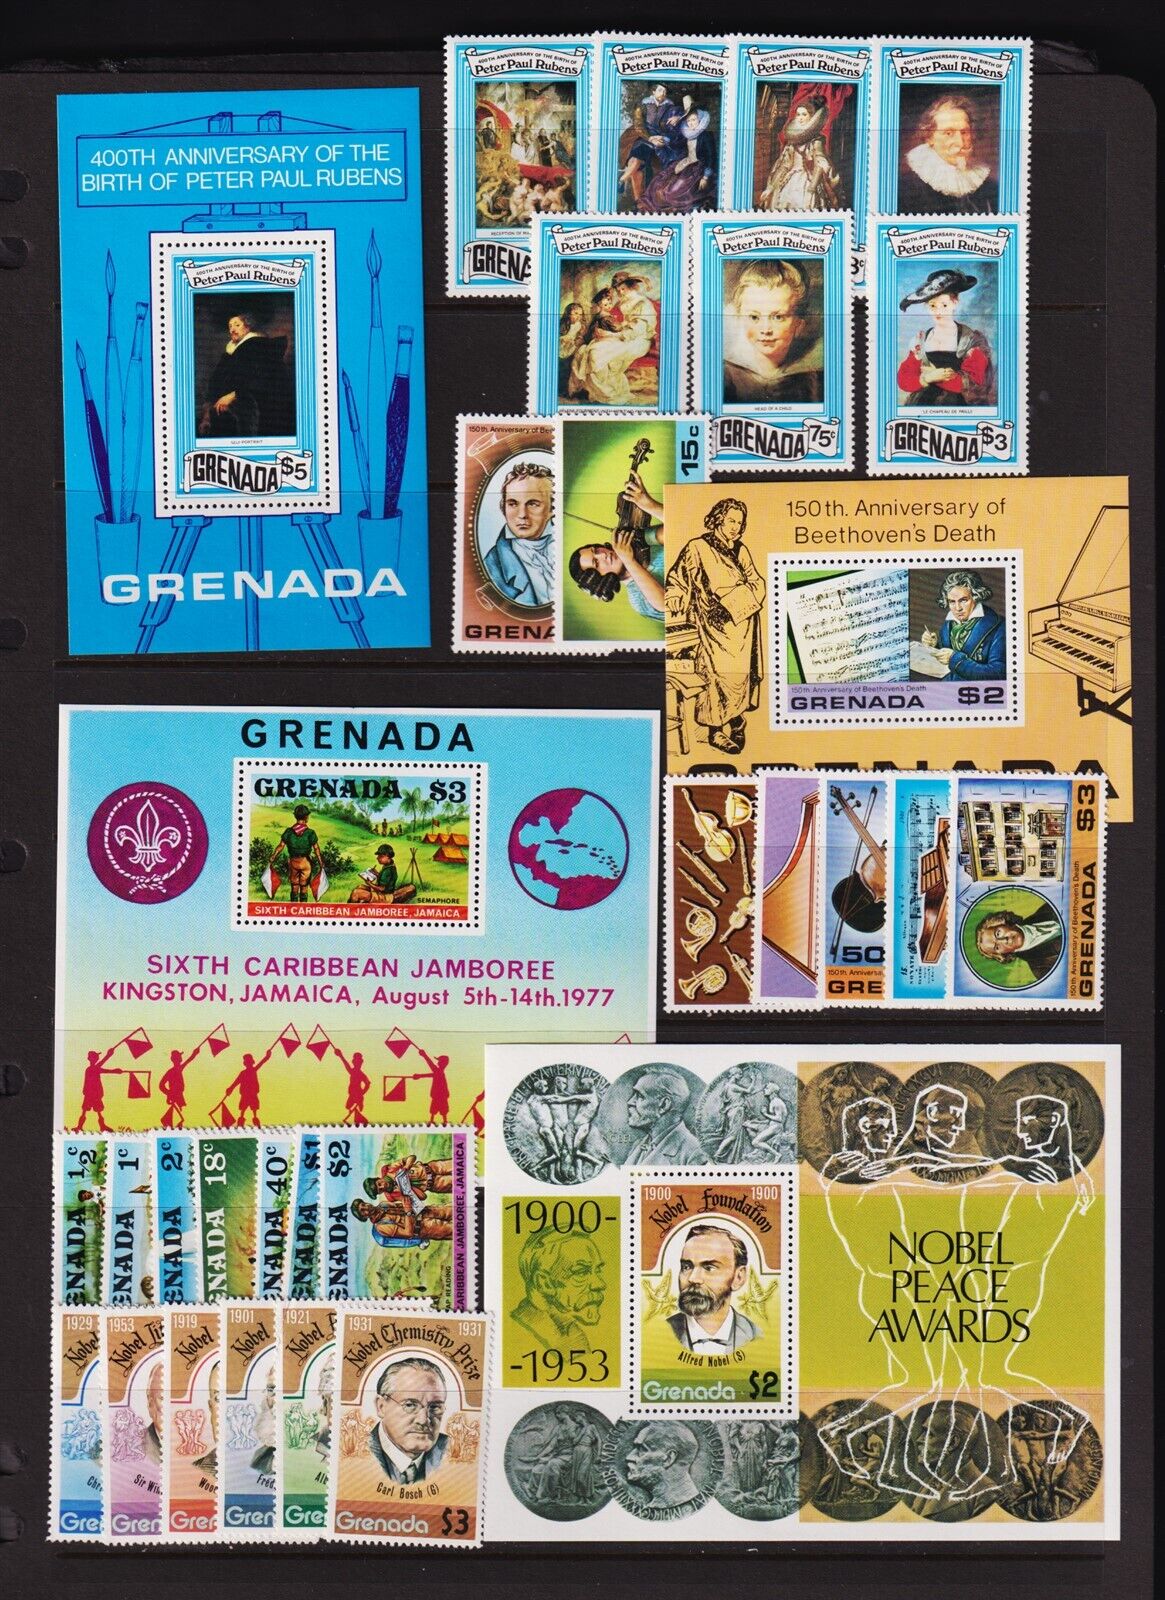 Grenada - 4 Mint Sets From 1977-78, Cat. $ 31.50